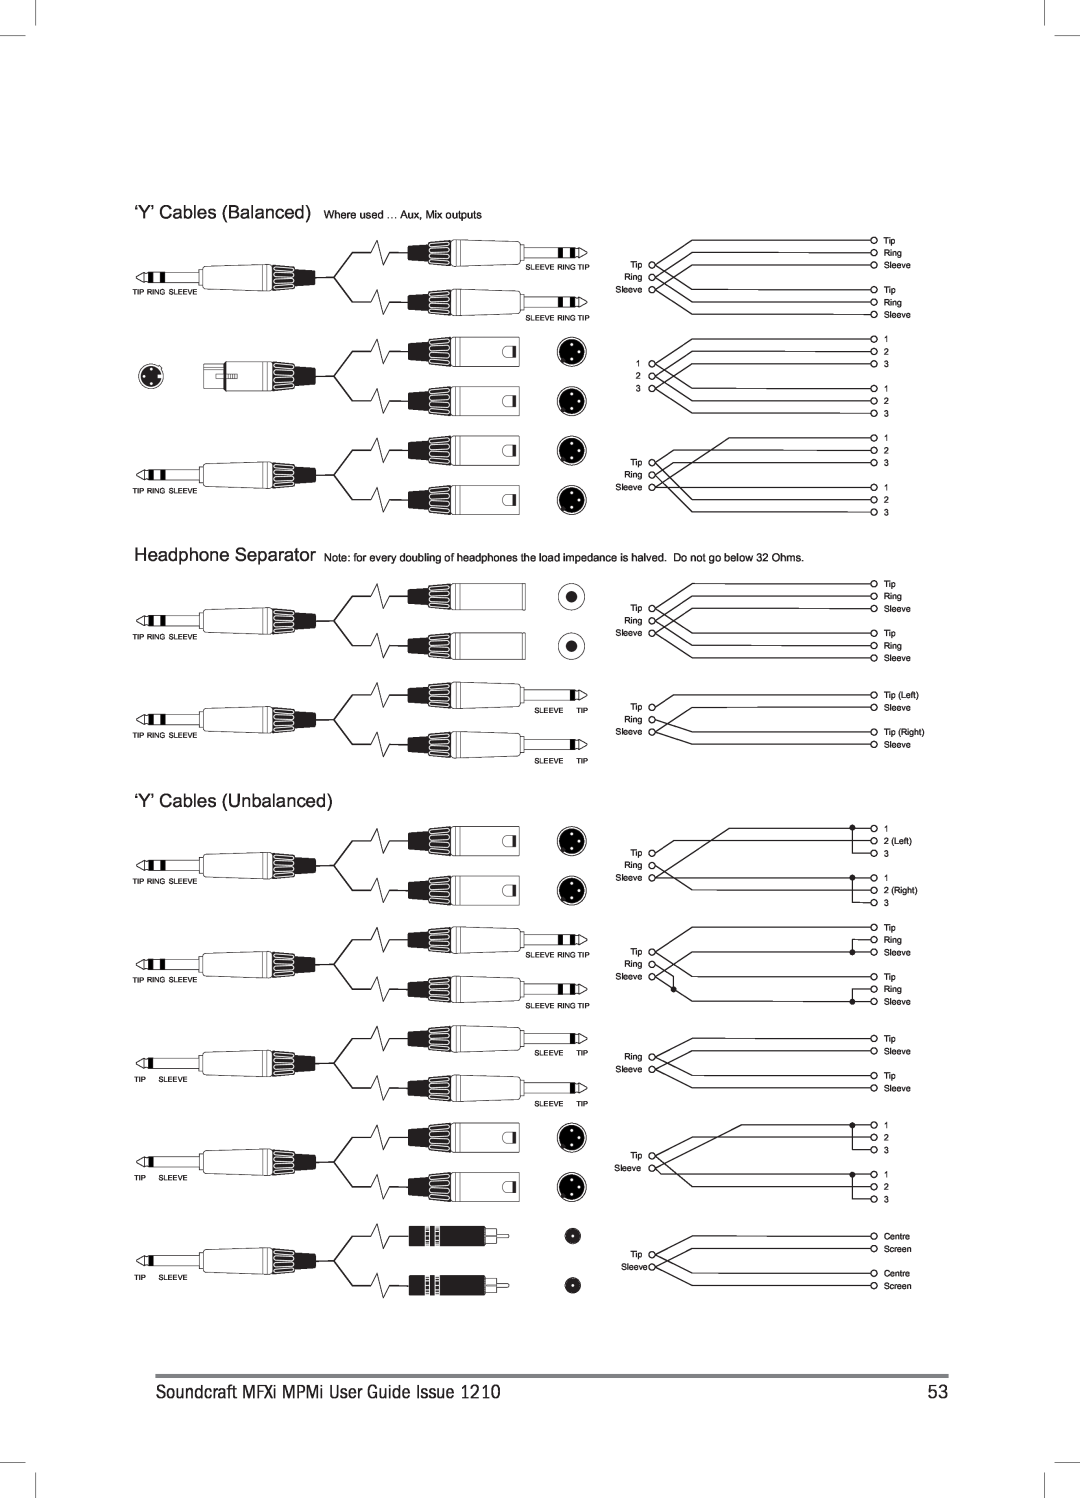 Harman MFXI, MPMI manual ‘Y’ Cables Unbalanced, ‘Y’ Cables Balanced Where used … Aux, Mix outputs 